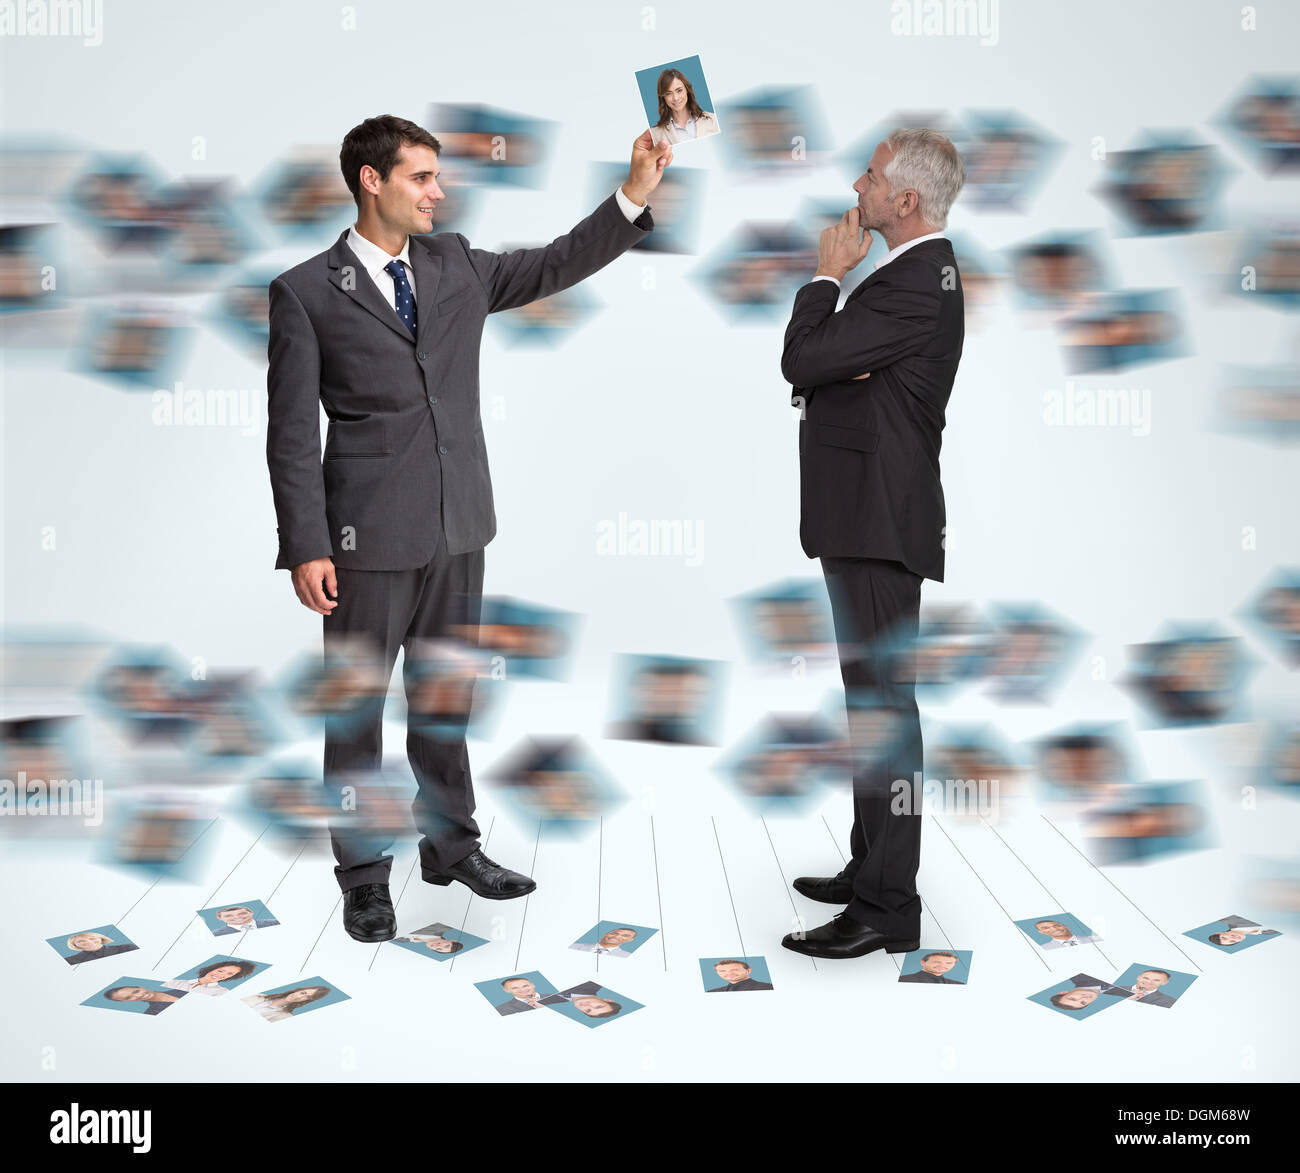 Classy businessmen working together Stock Photo